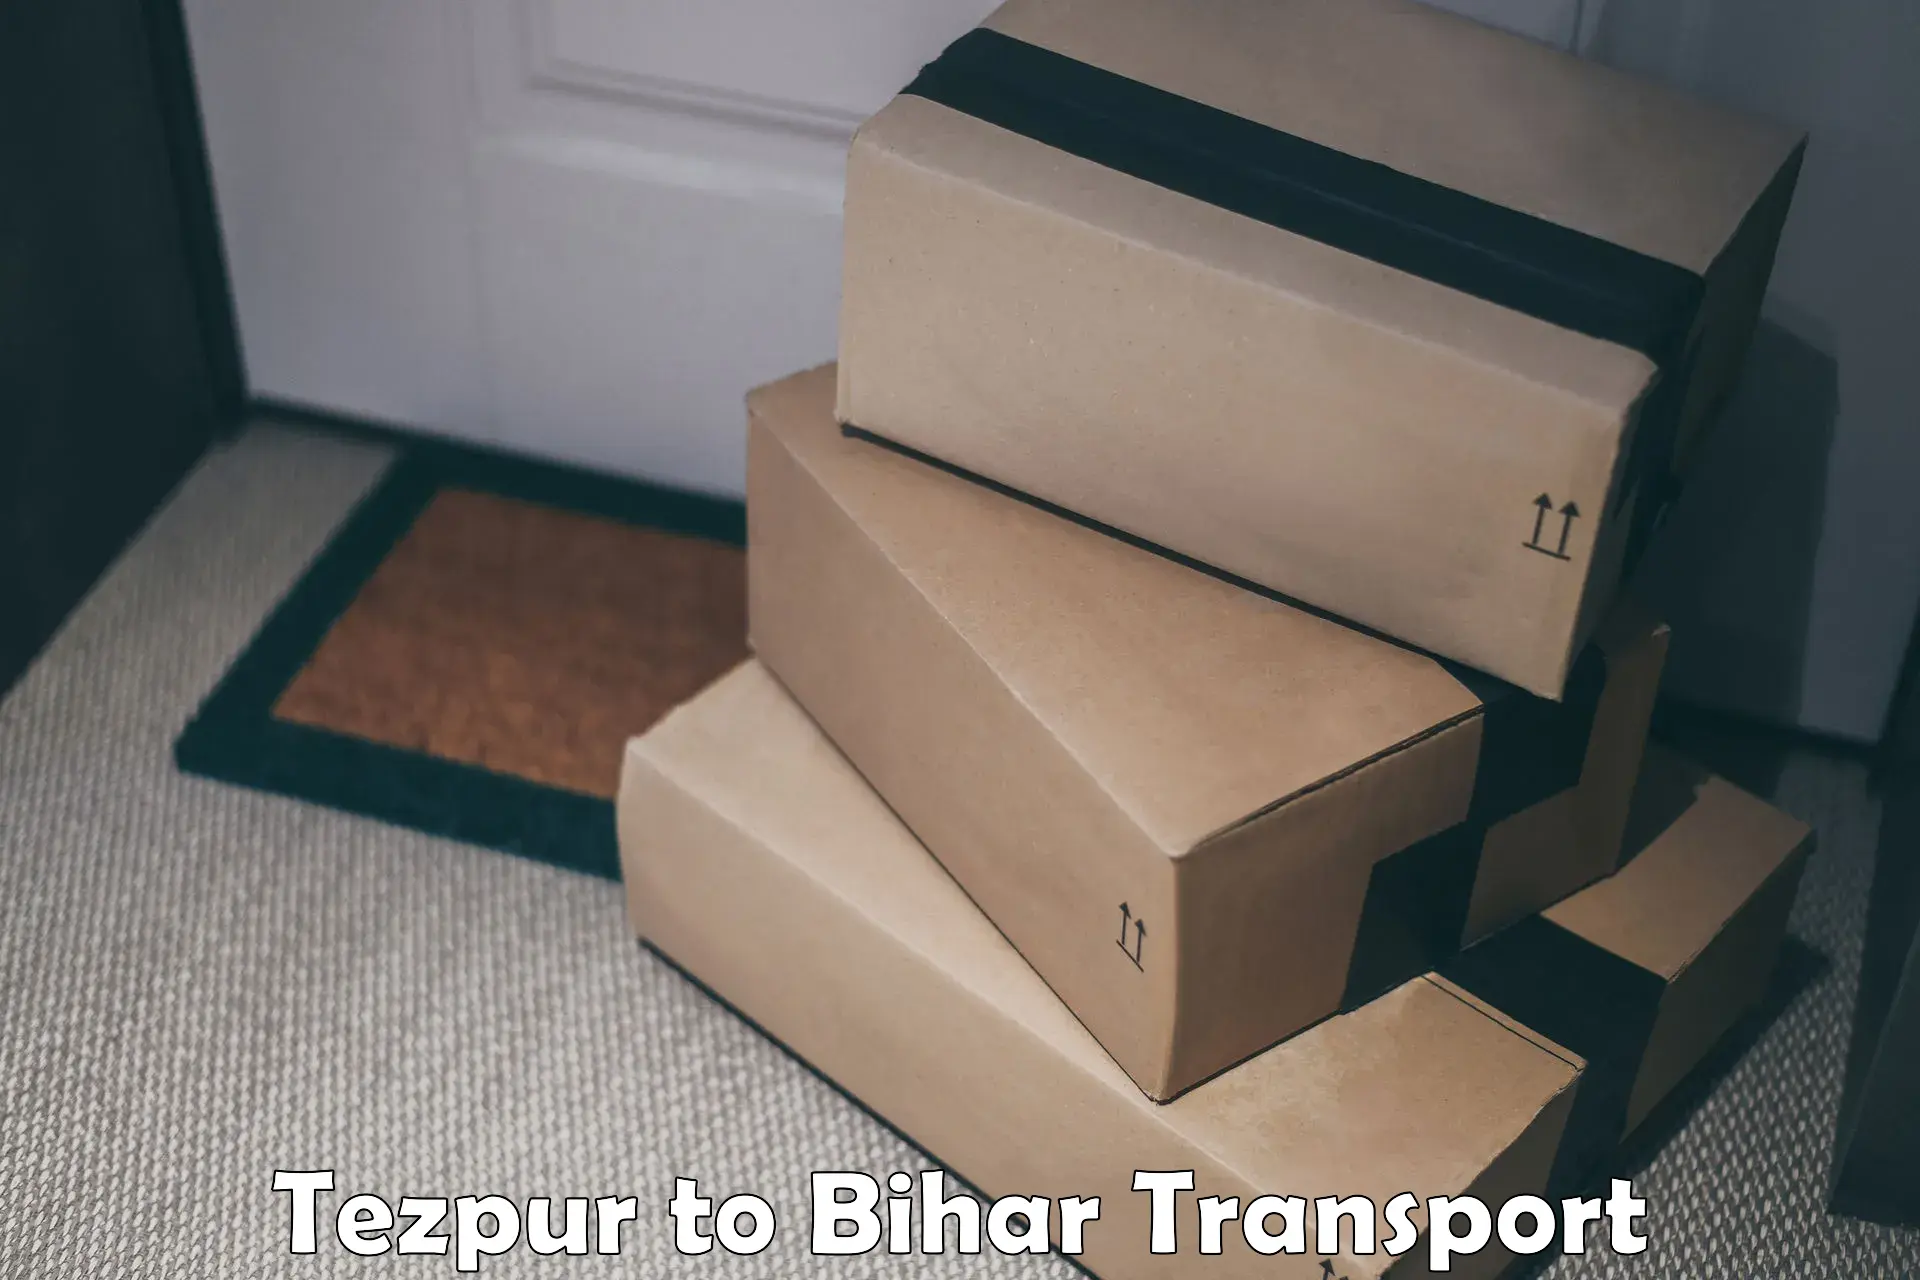 Container transport service Tezpur to Samastipur